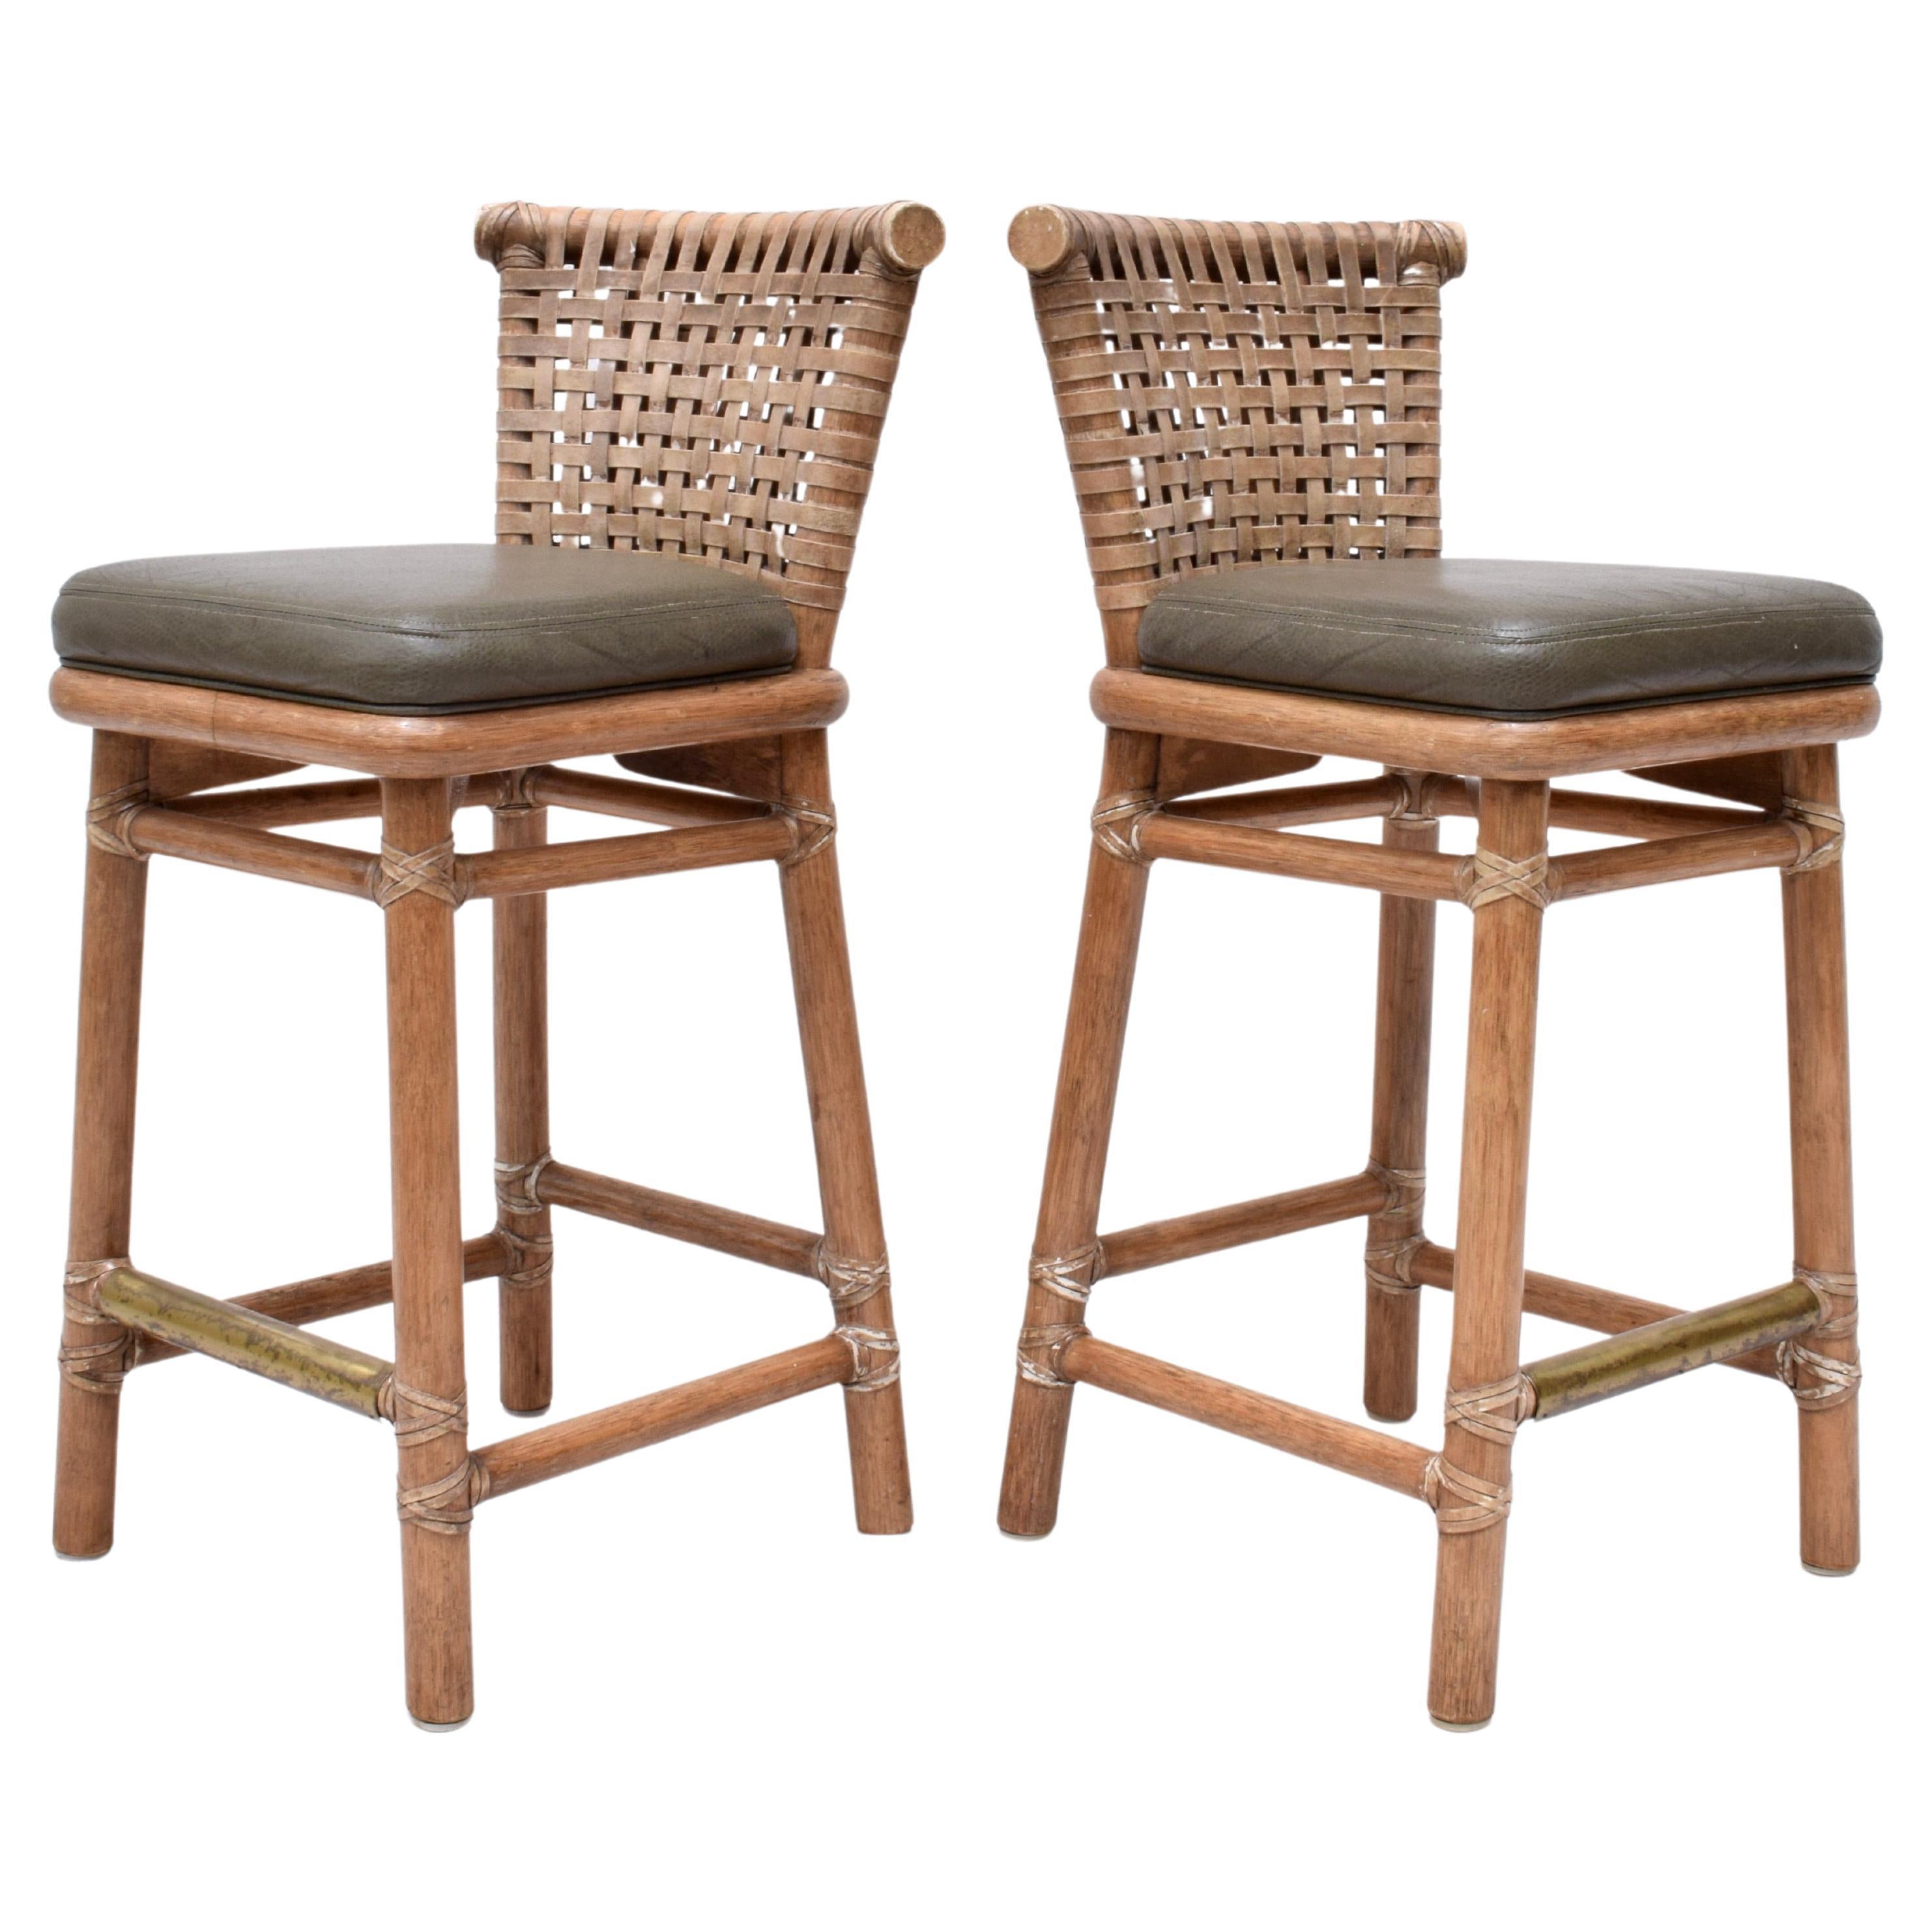 McGuire Laced Leather & Solid Oak Barstools, Pair